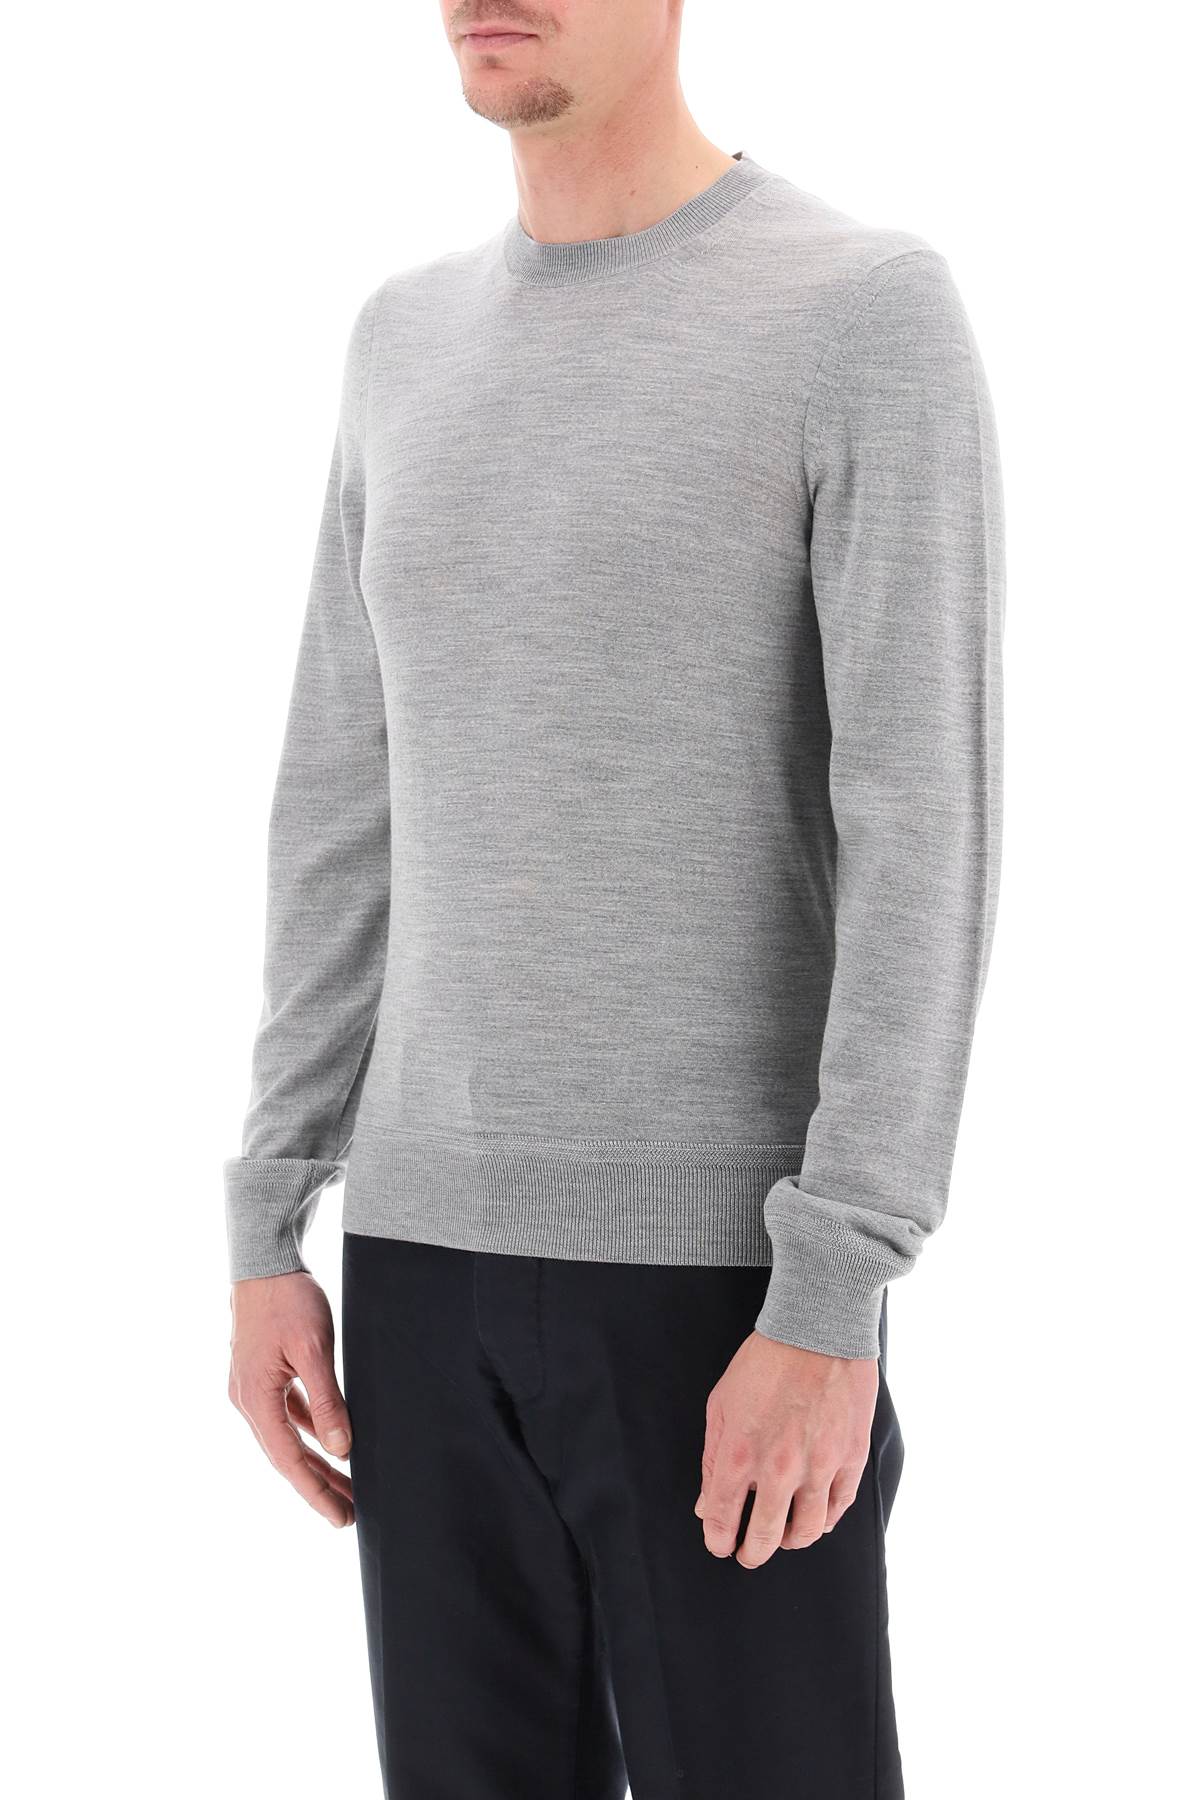 Tom Ford Tom ford light wool sweater